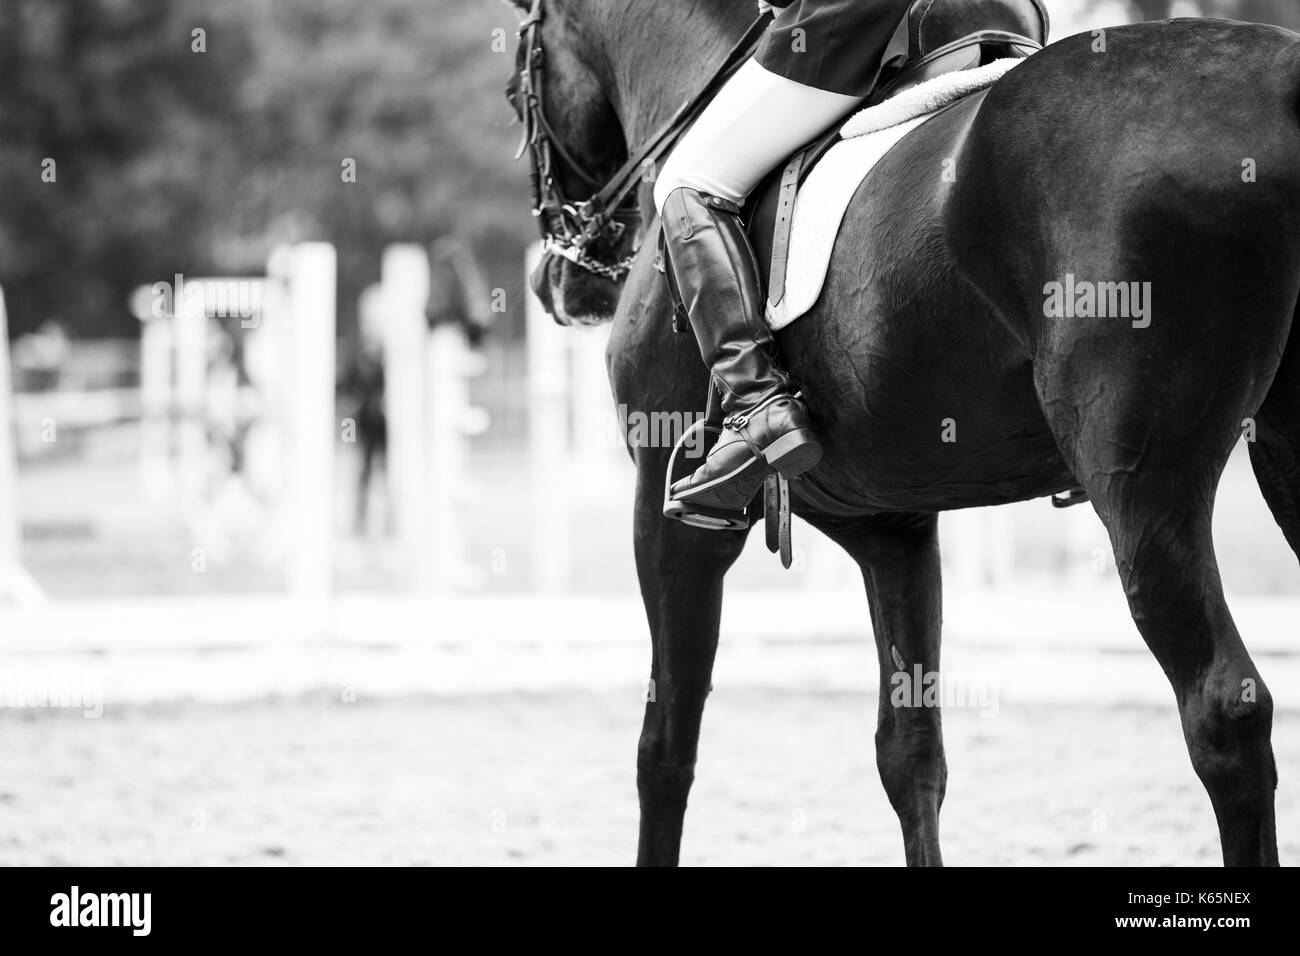 Close up image of horse with rider at dressage equestrian sports competitions. Details of equestrian equipment Stock Photo